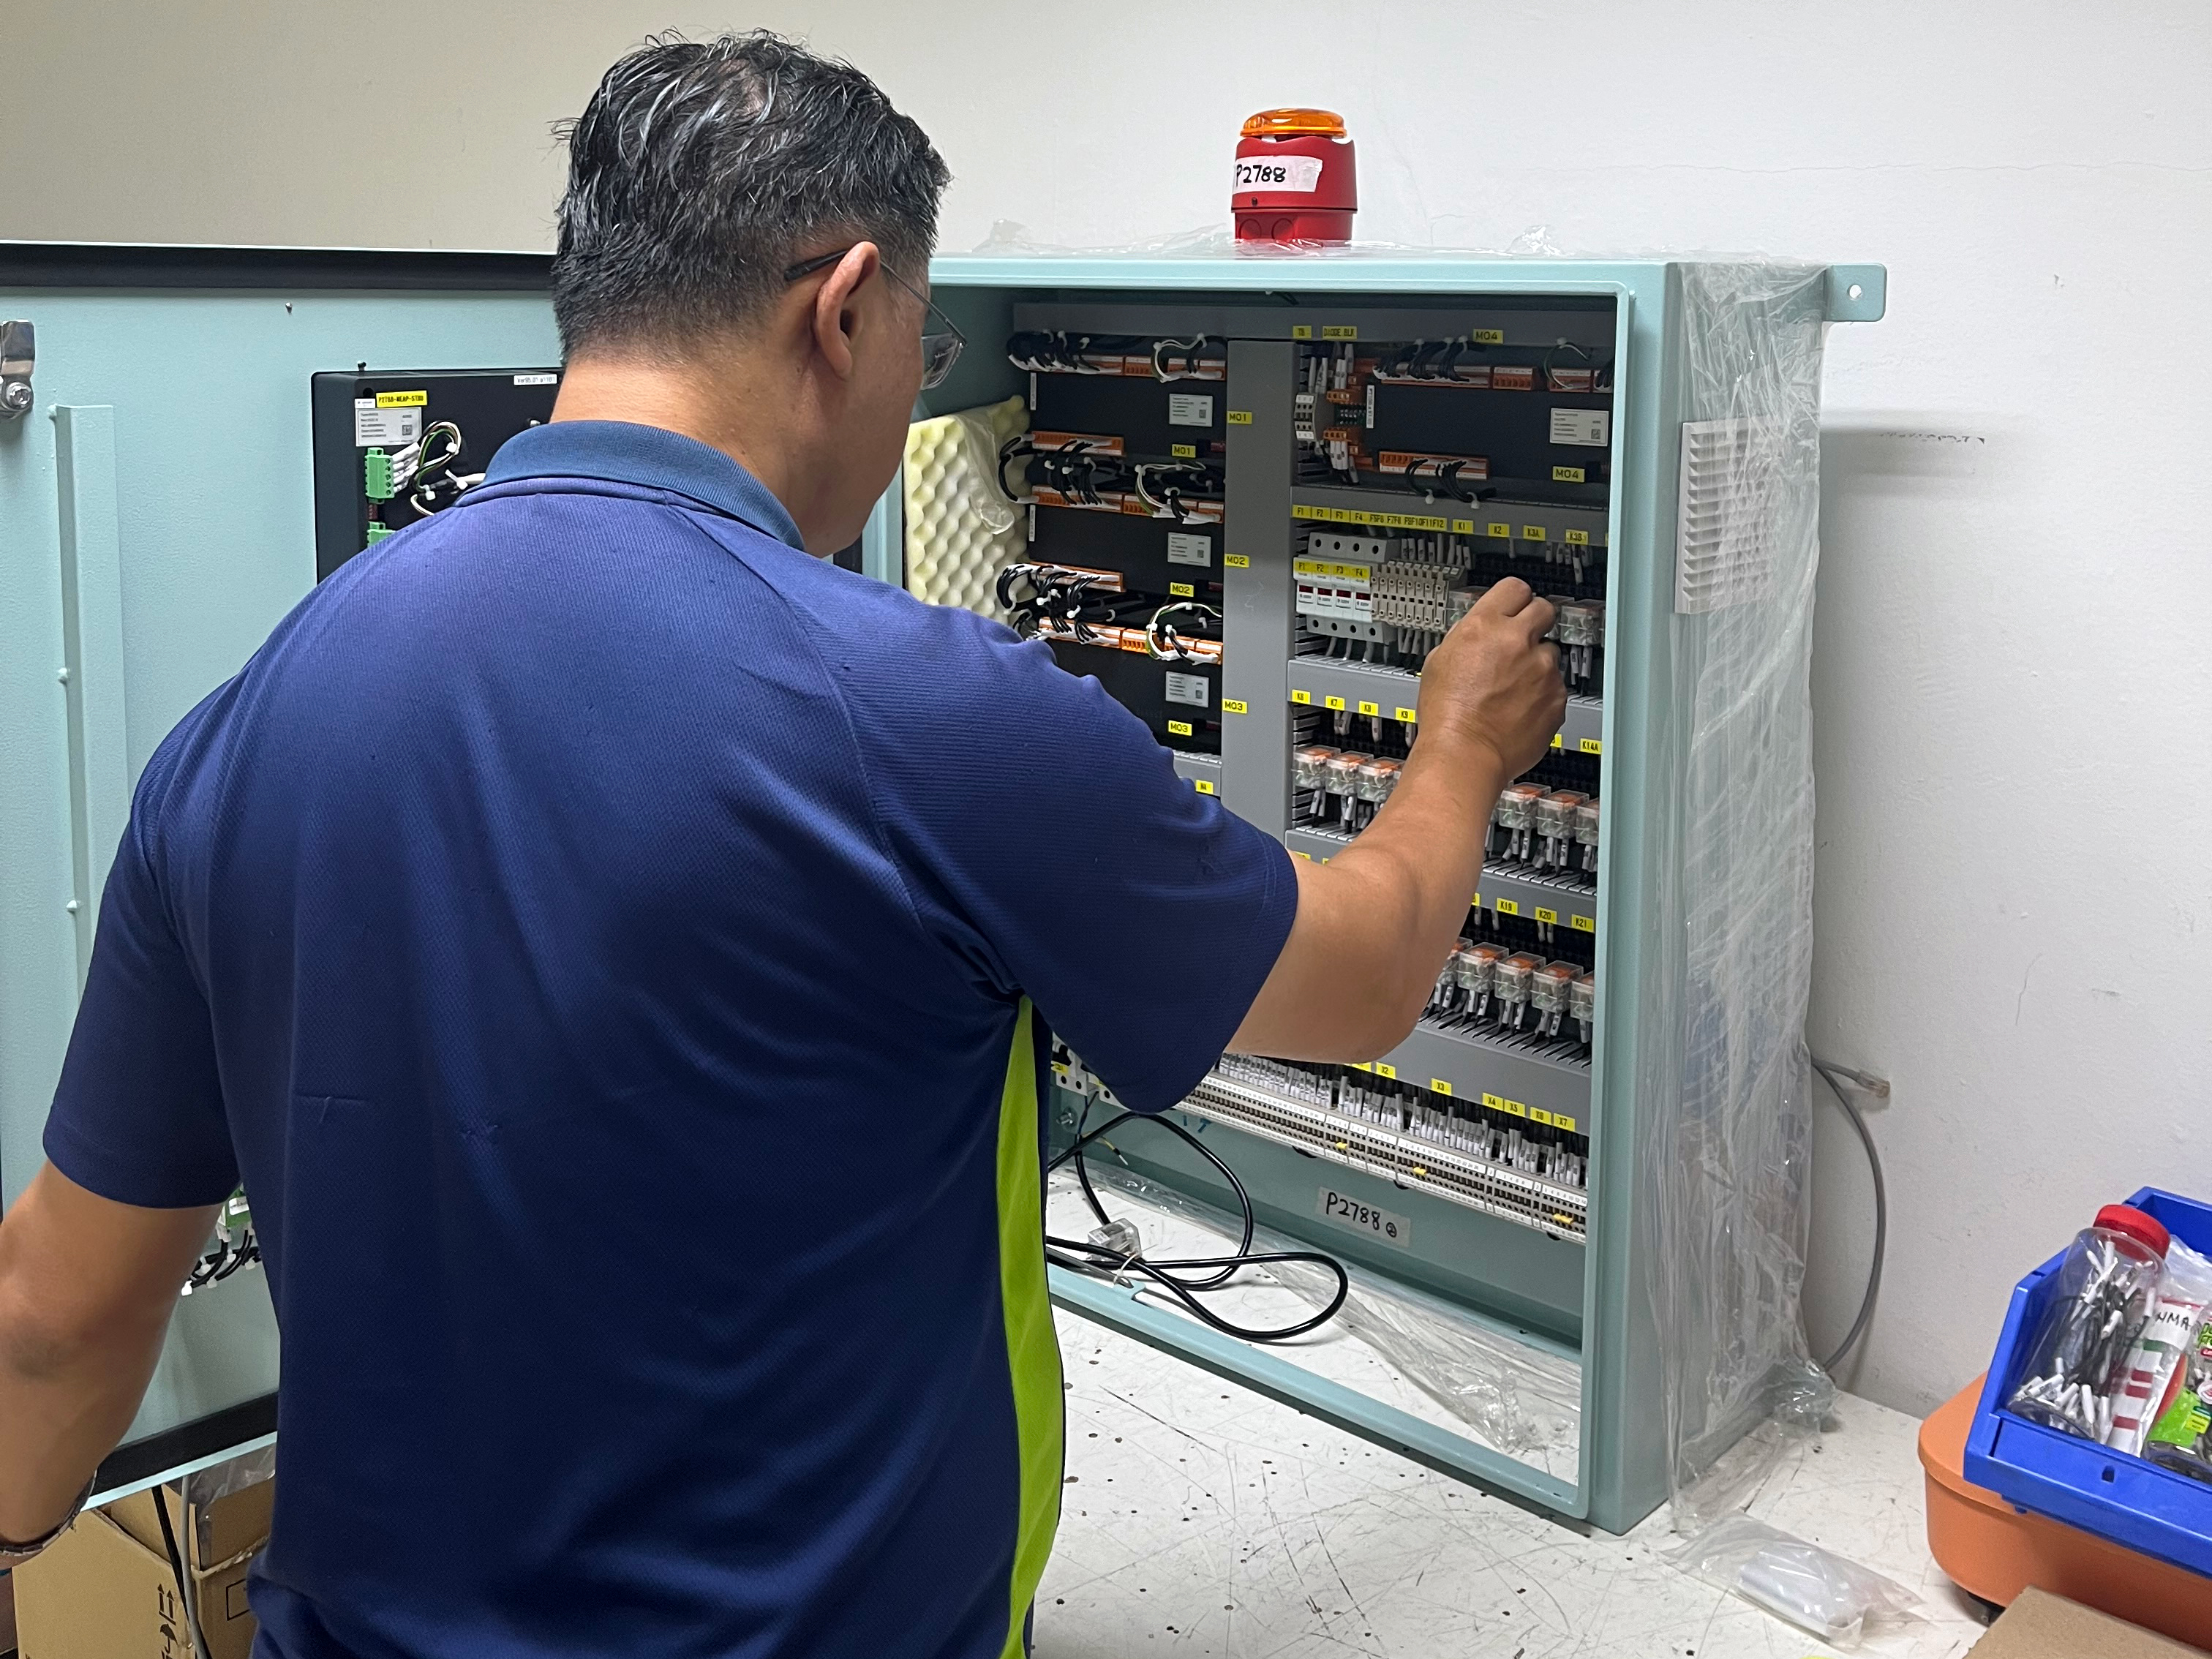 The image shows a Service Technician of Noris Automation Far East